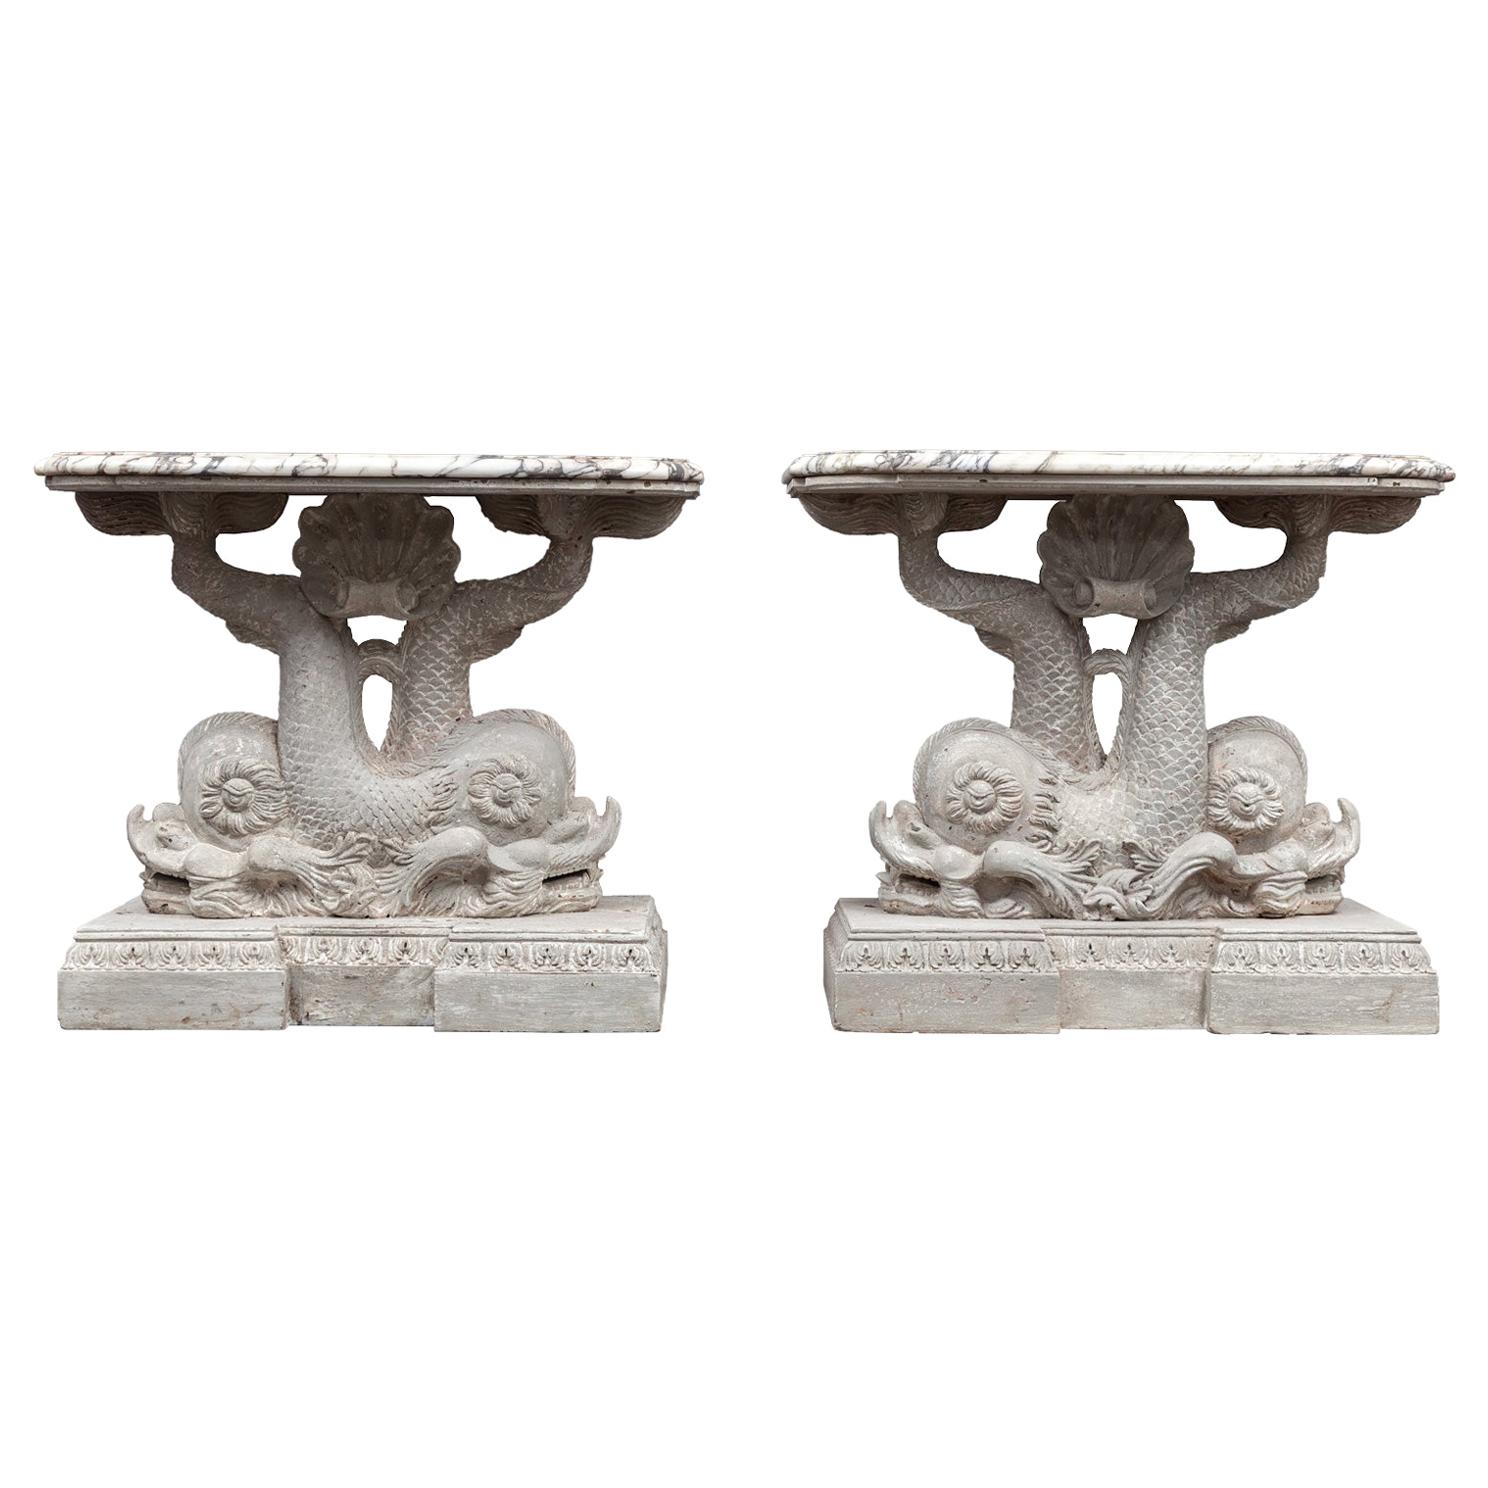 Antique Pair of Carved Wooden Dolphin Tables with Marble Tops